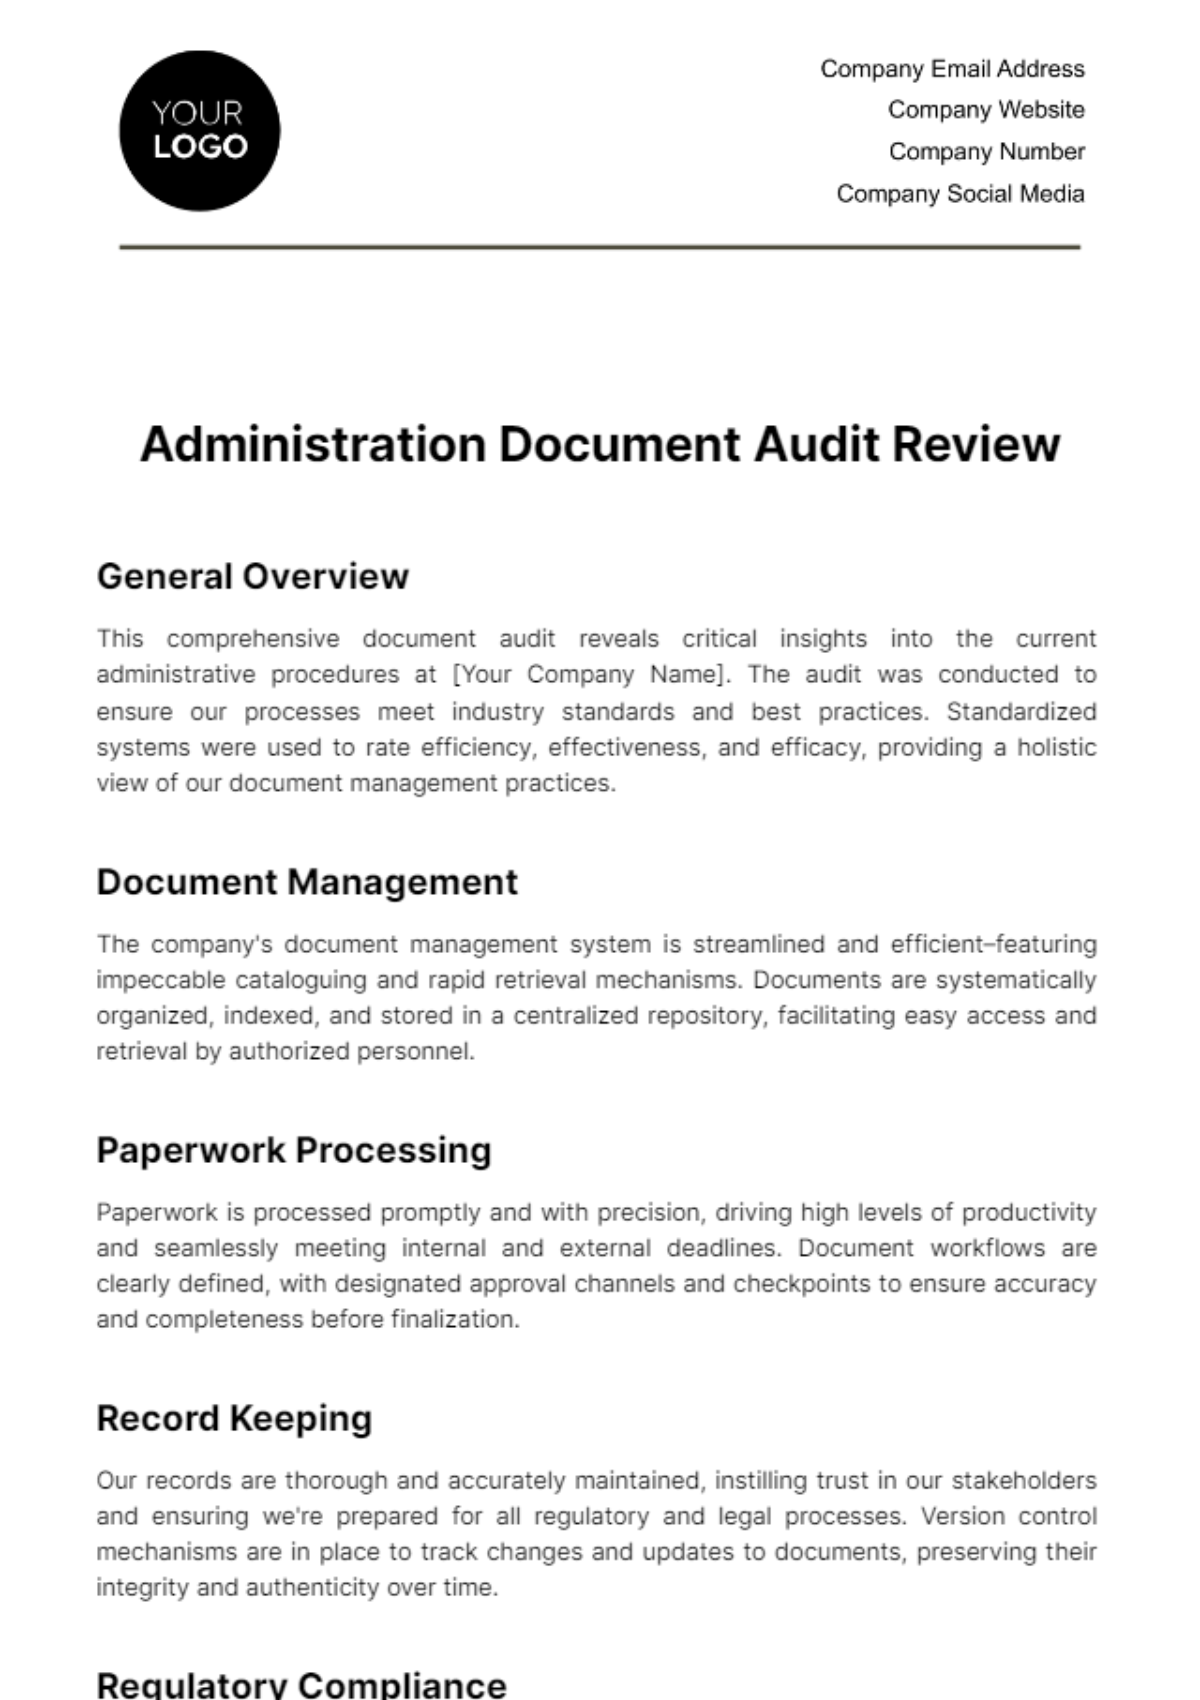 Free Administration Document Audit Review Template